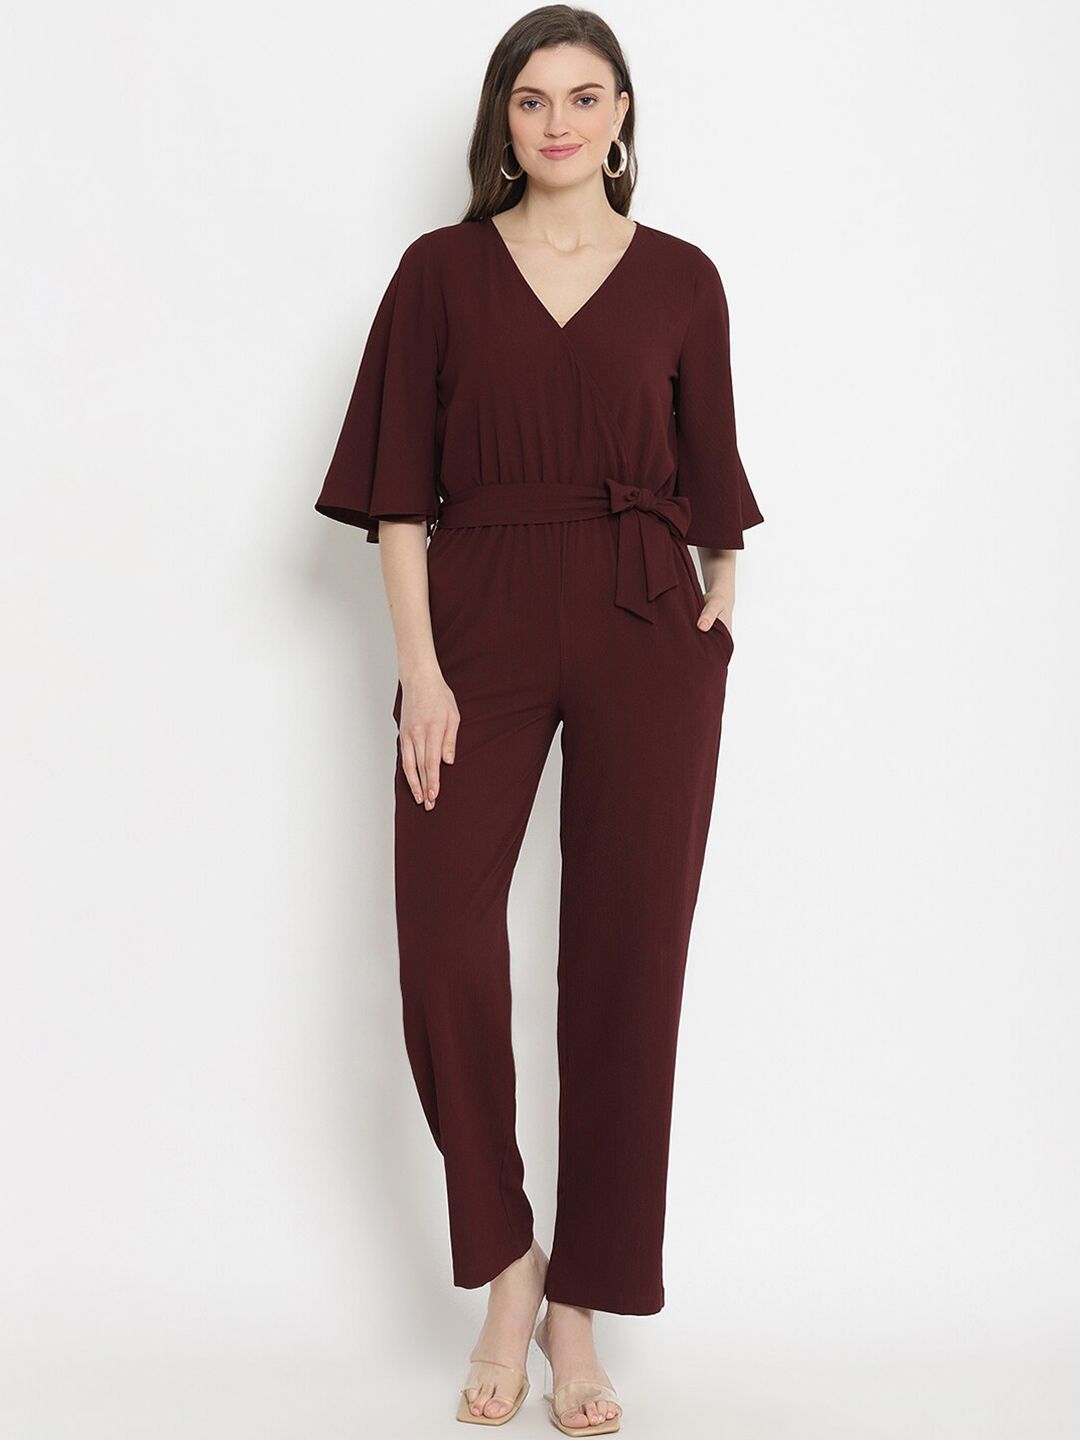 The Vanca Women Maroon Solid Basic Jumpsuit with Flare Sleeve Price in India